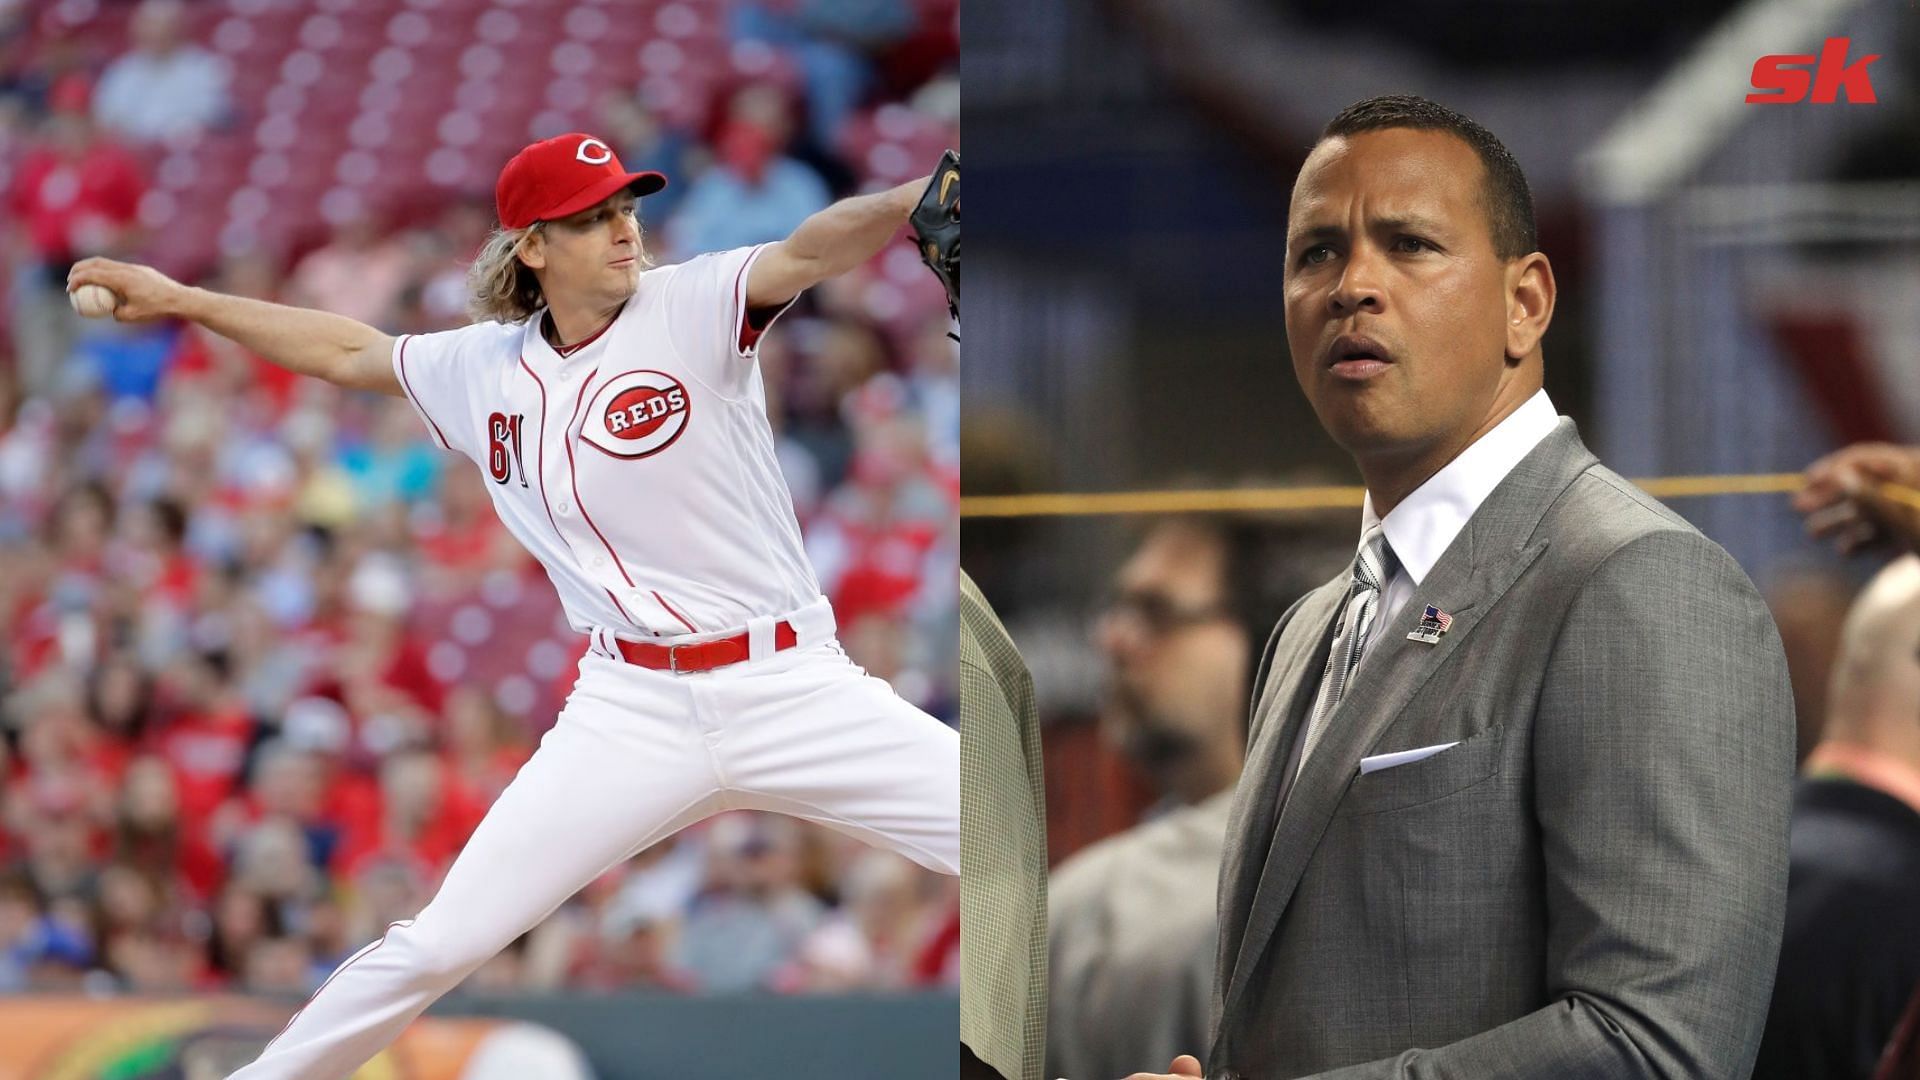 When Alex Rodriguez ignited controversy after his karate chop on Bronson Arroyo in ALCS 